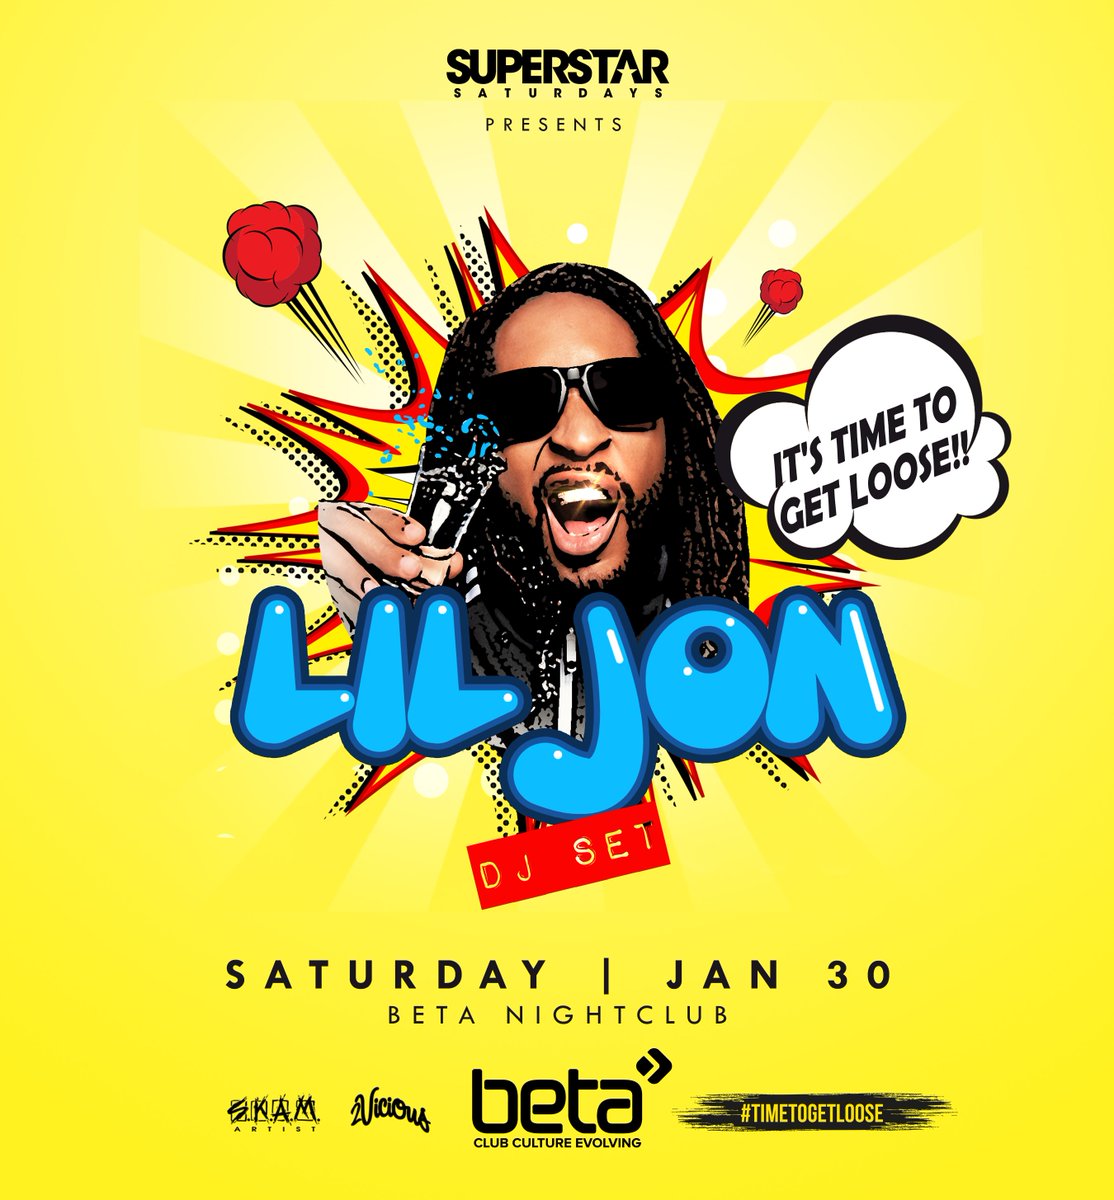 RT @BetaNightclub: @LilJon returns to Beta for what's set to be one of the wildest parties of the year!

Tix :: https://t.co/2DuSsfXYMM htt…